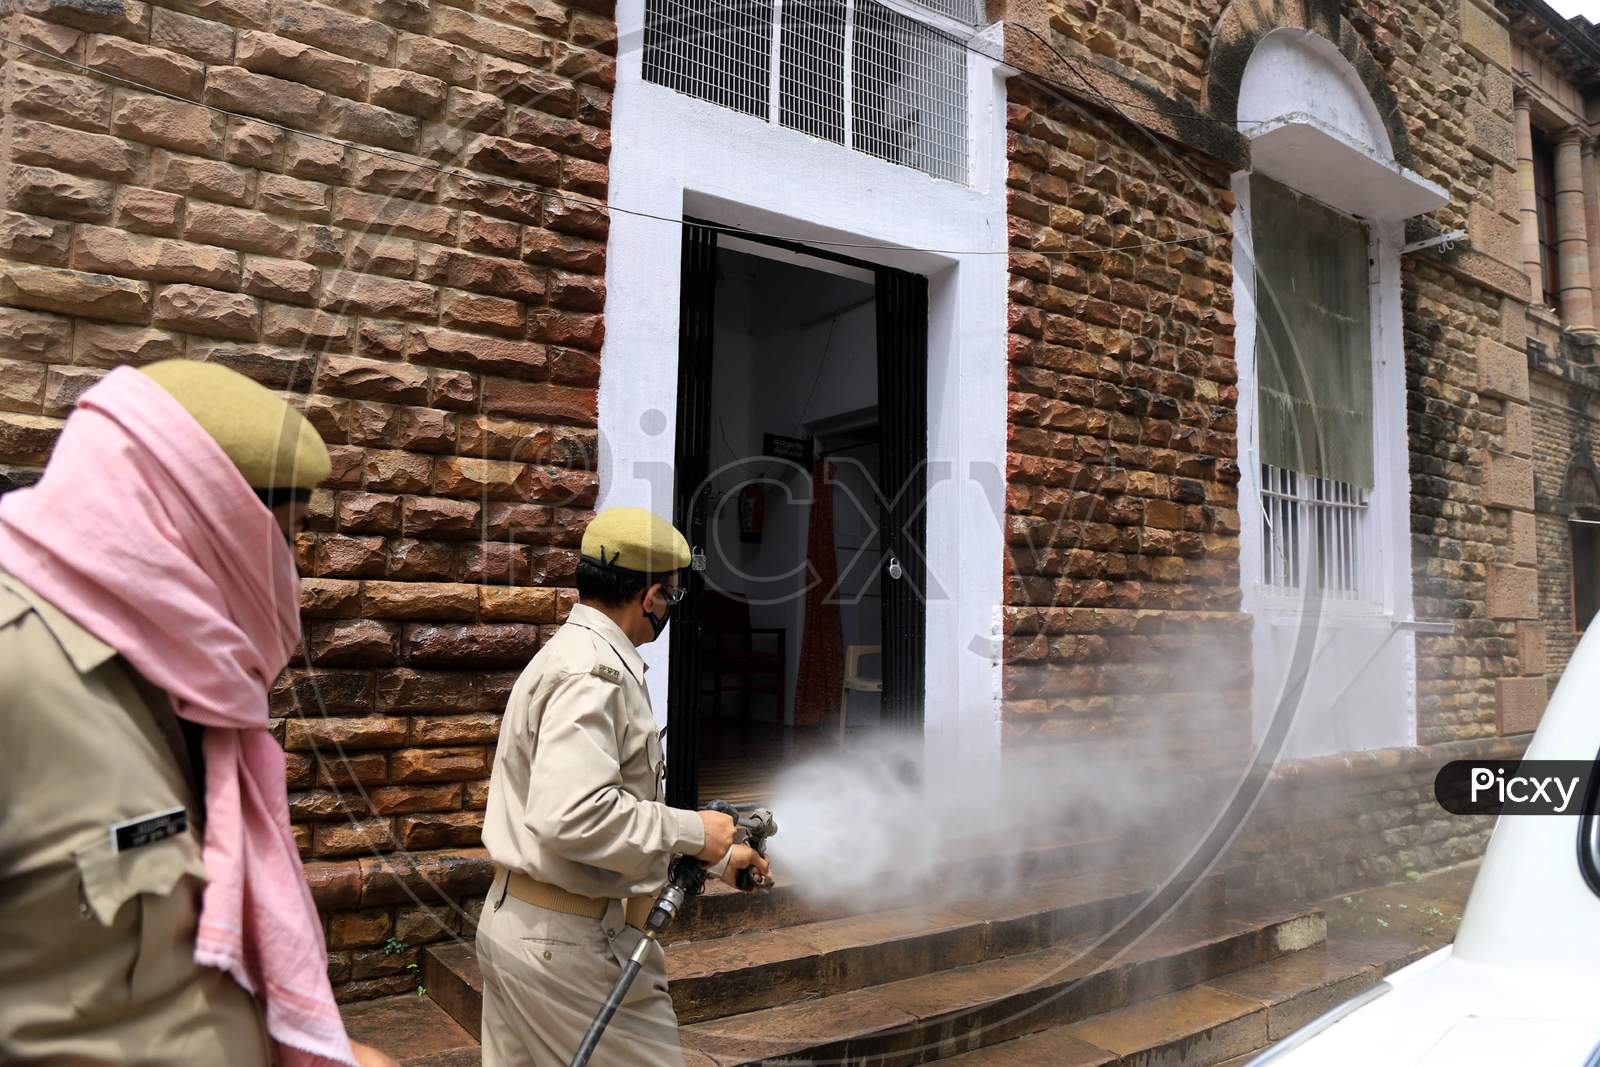 Firefighters Spray Sanitizer On A Car During A Nationwide Lockdown Amidst COVID-19 or Coronavirus Outbreak In Prayagraj, April 20, 2020